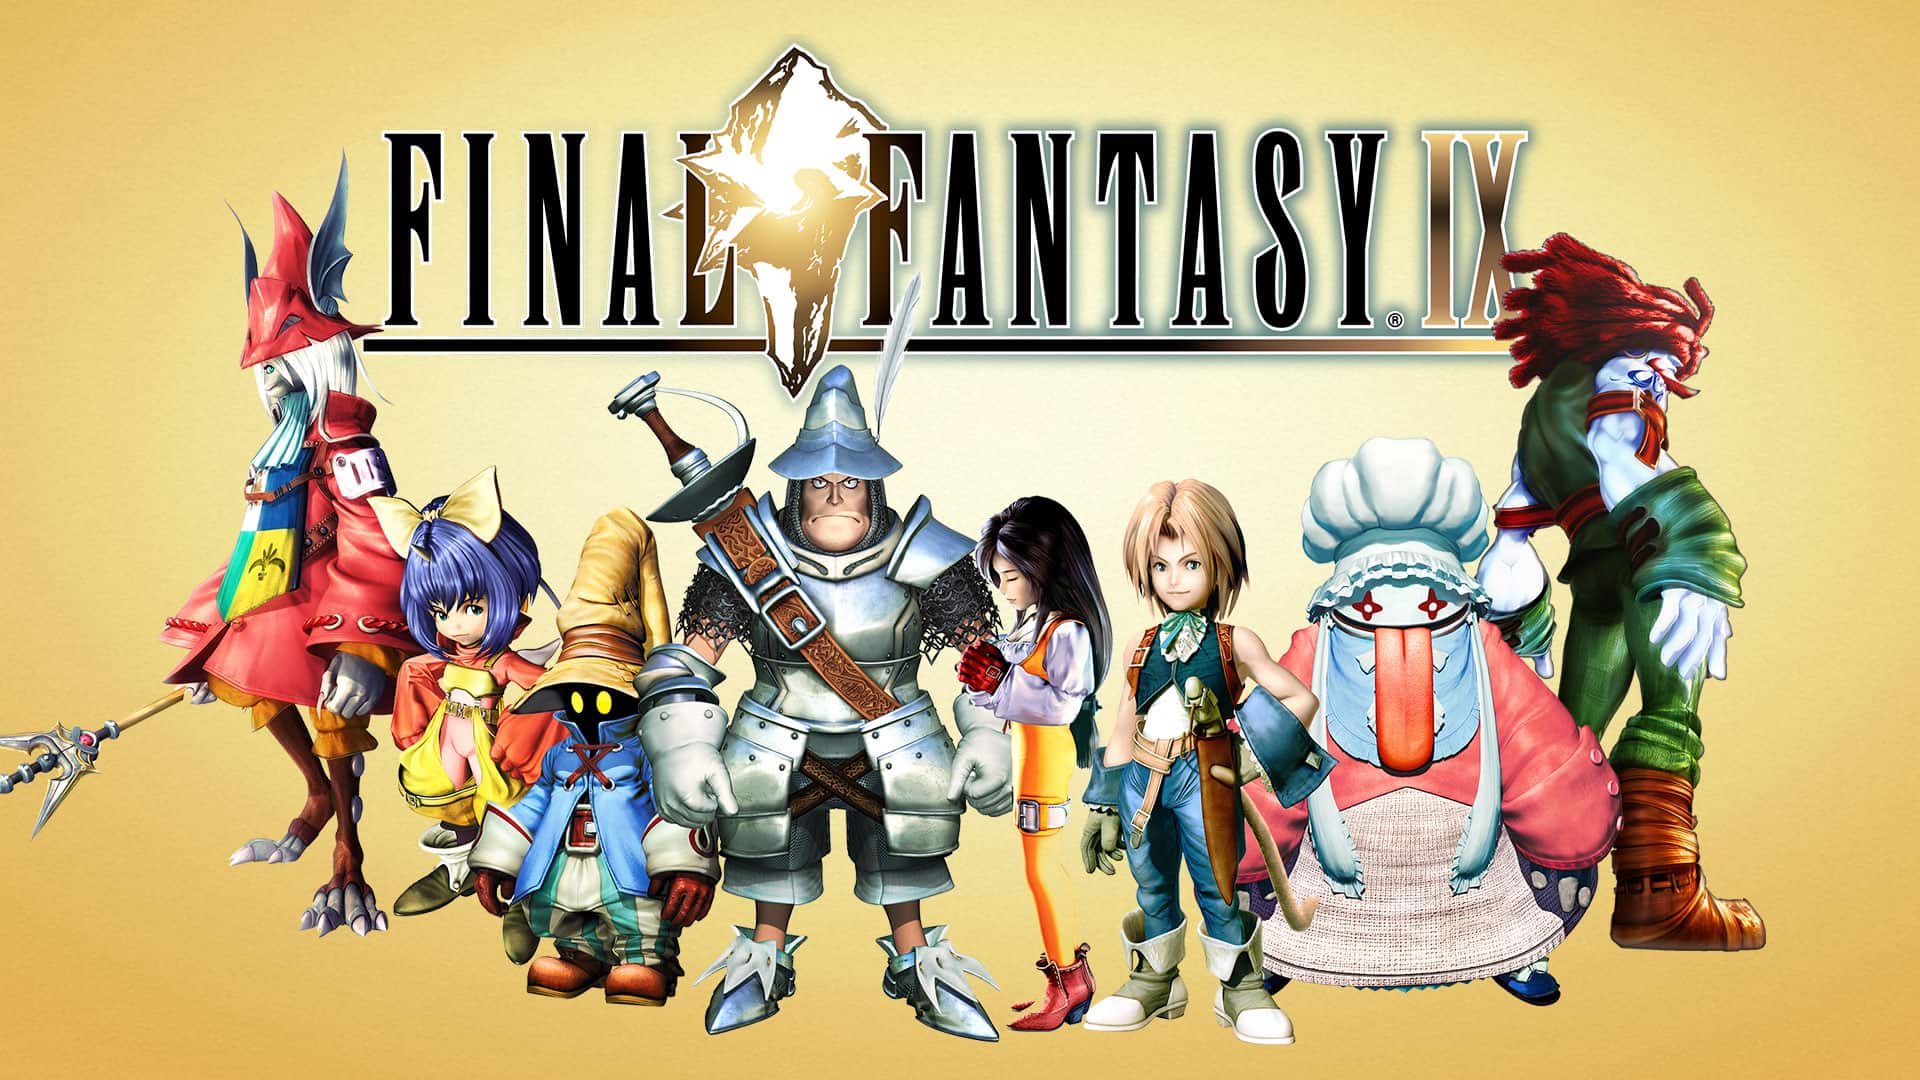 A Final Fantasy IX anime series is in the works